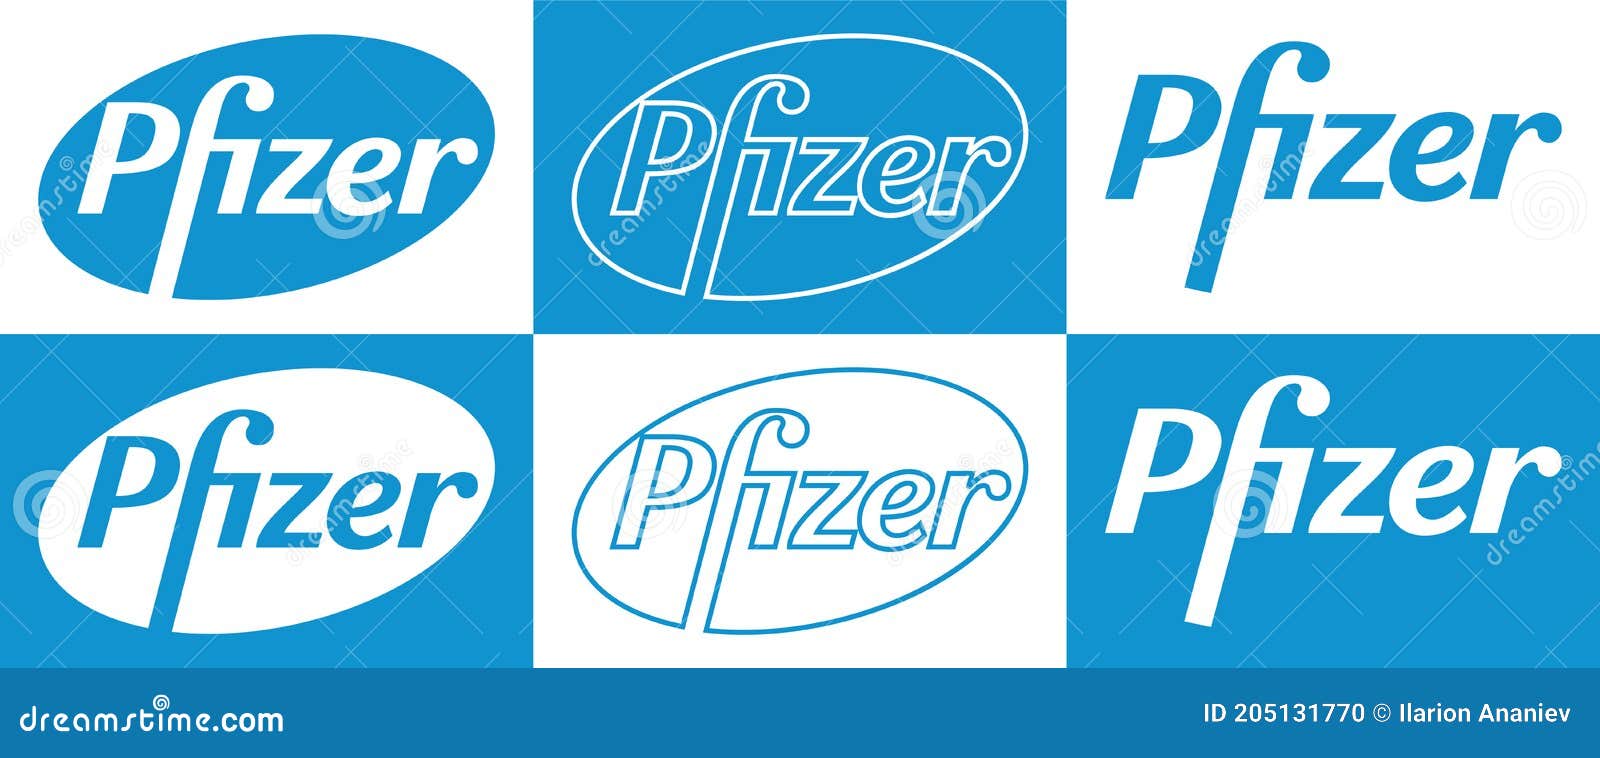 Pfizer's new acquisition generates billions of dollars from migraine drug —  MedWatch